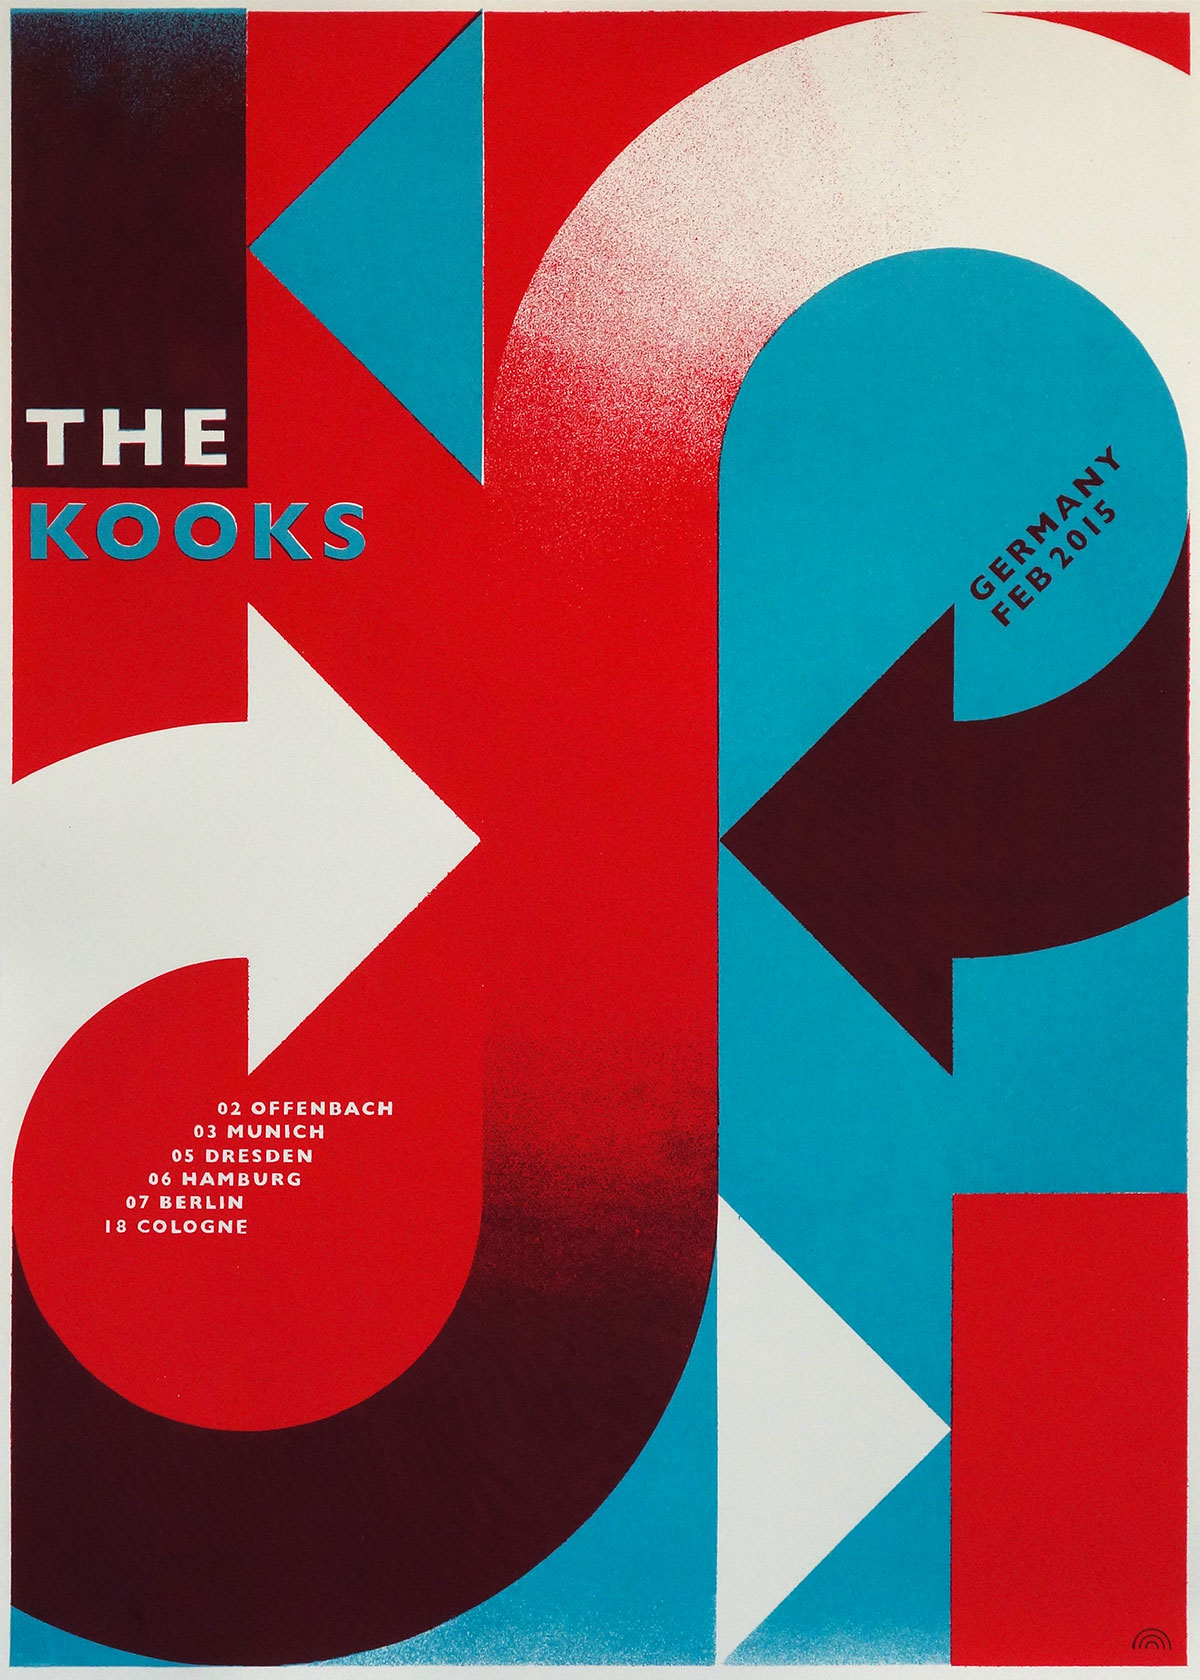 The Kooks gigposter by Rainbow Posters